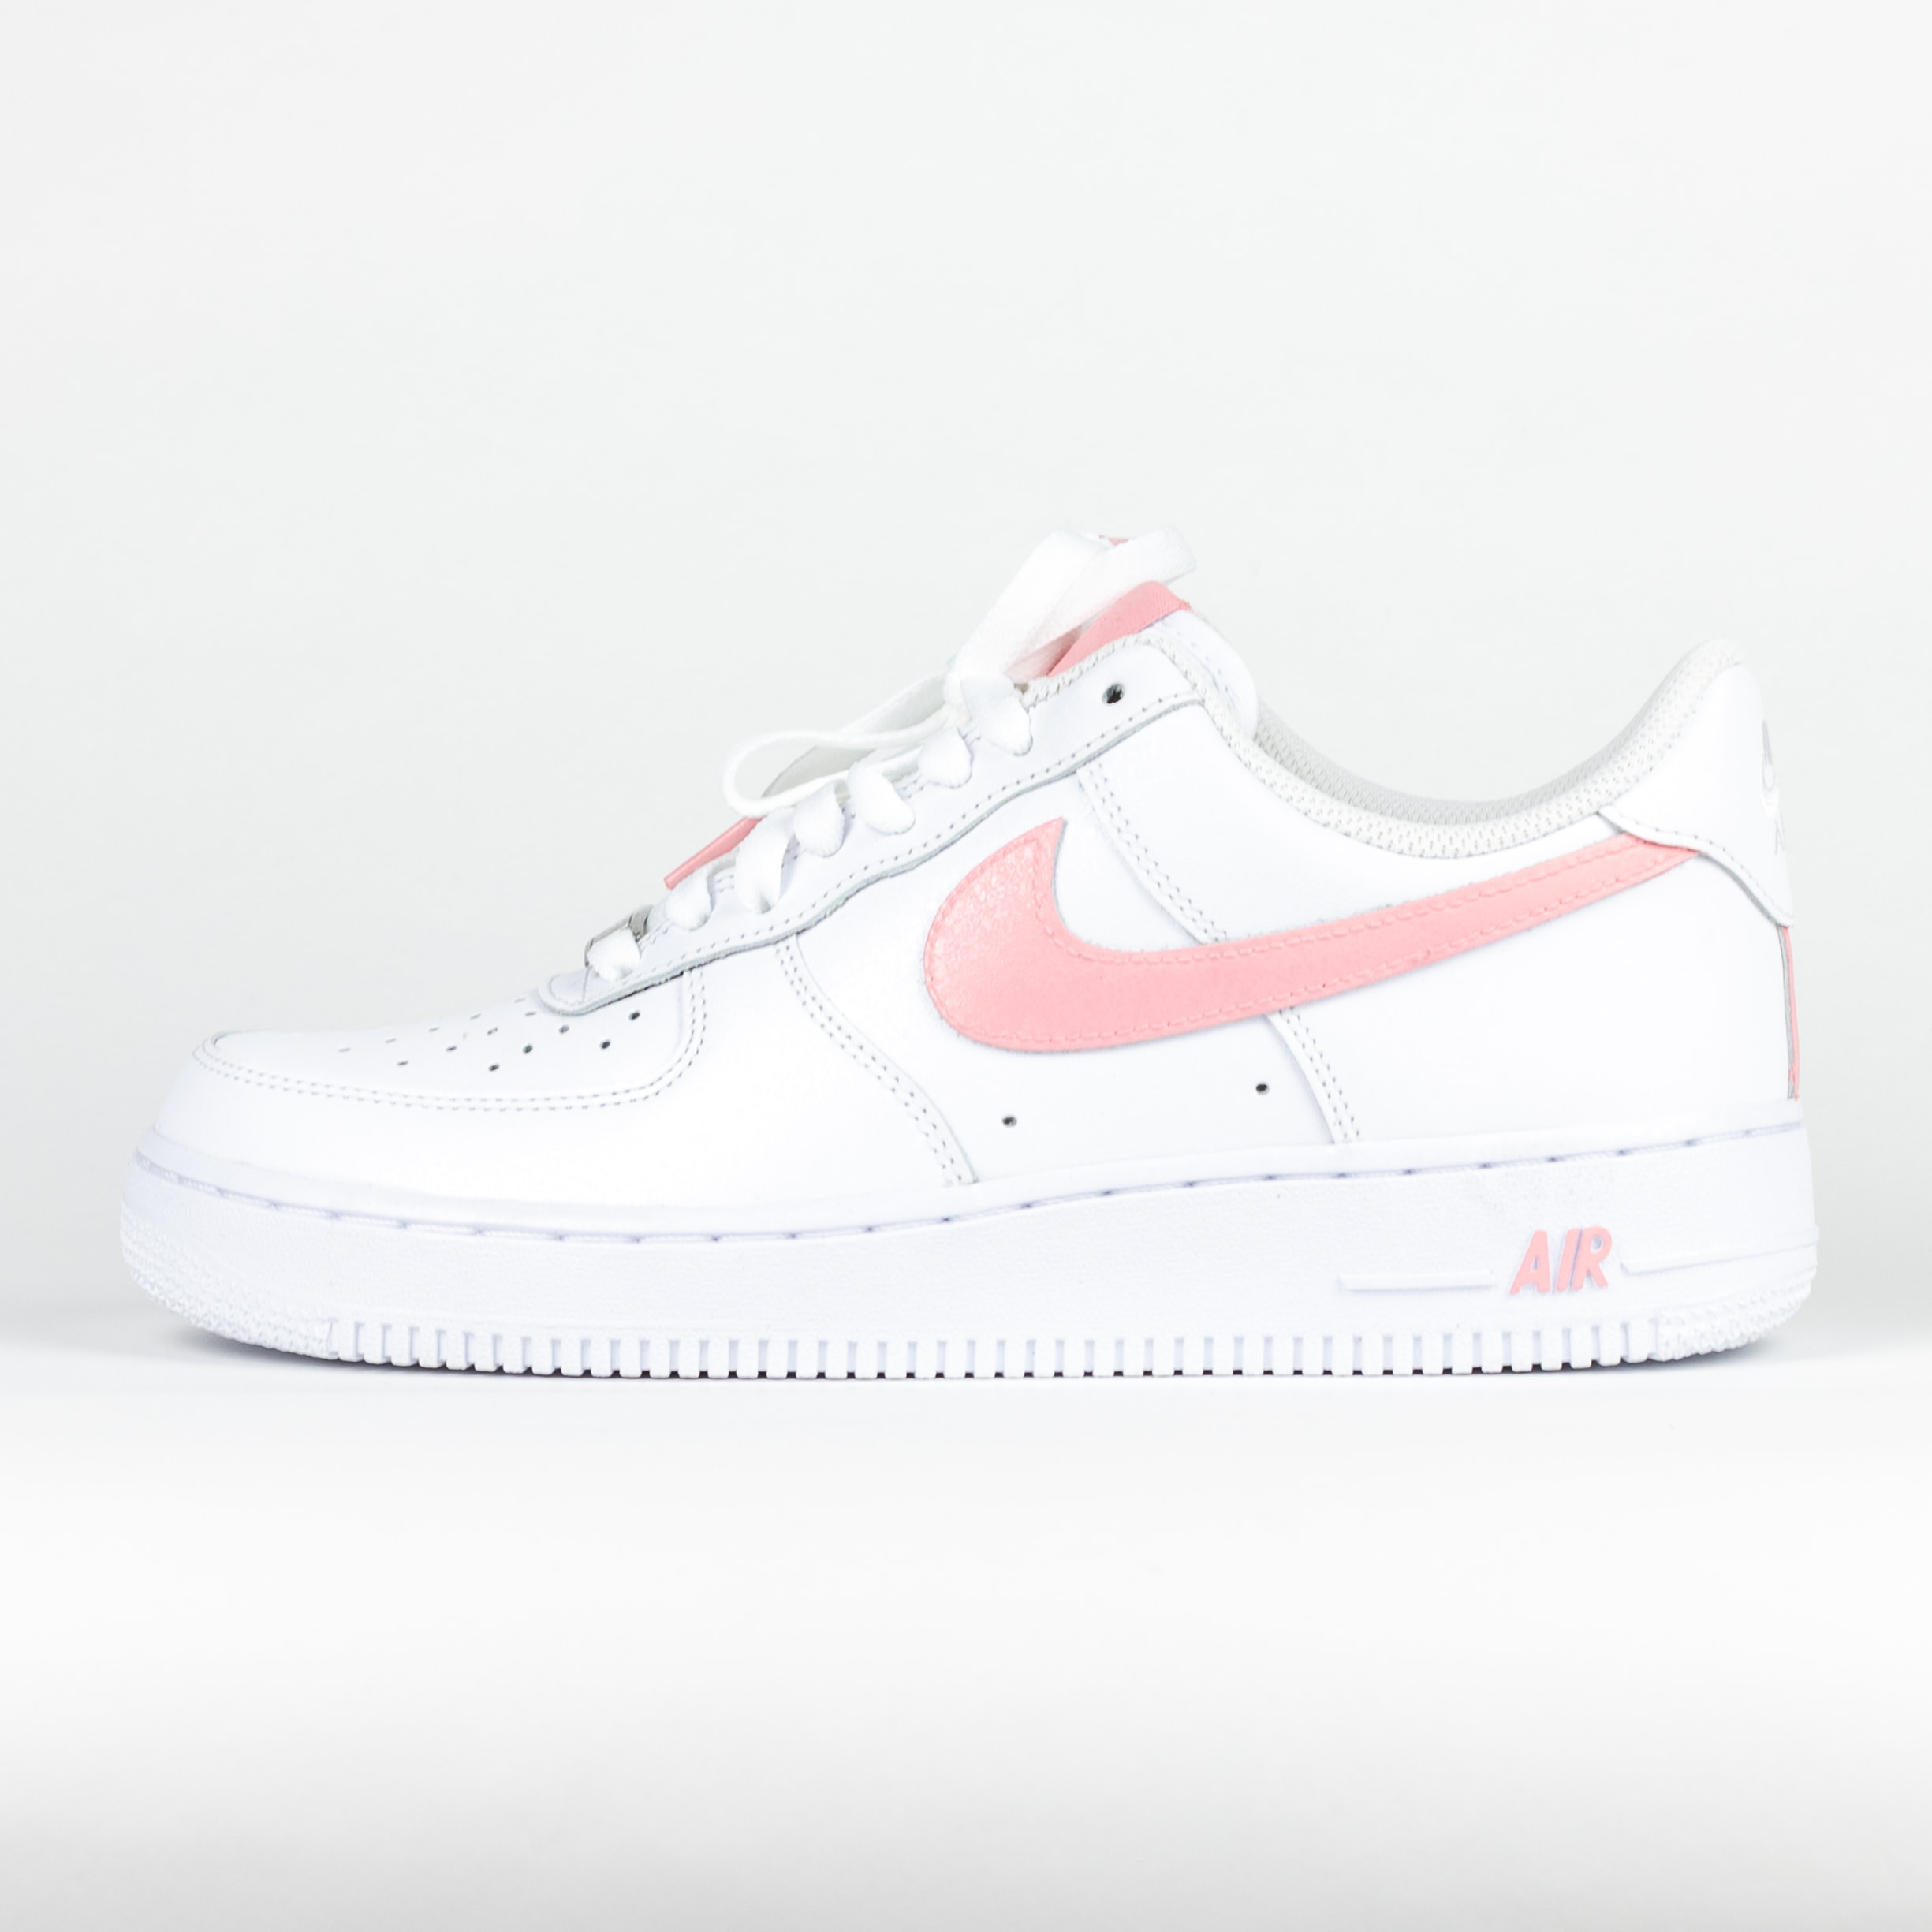 air force ones with pink swoosh